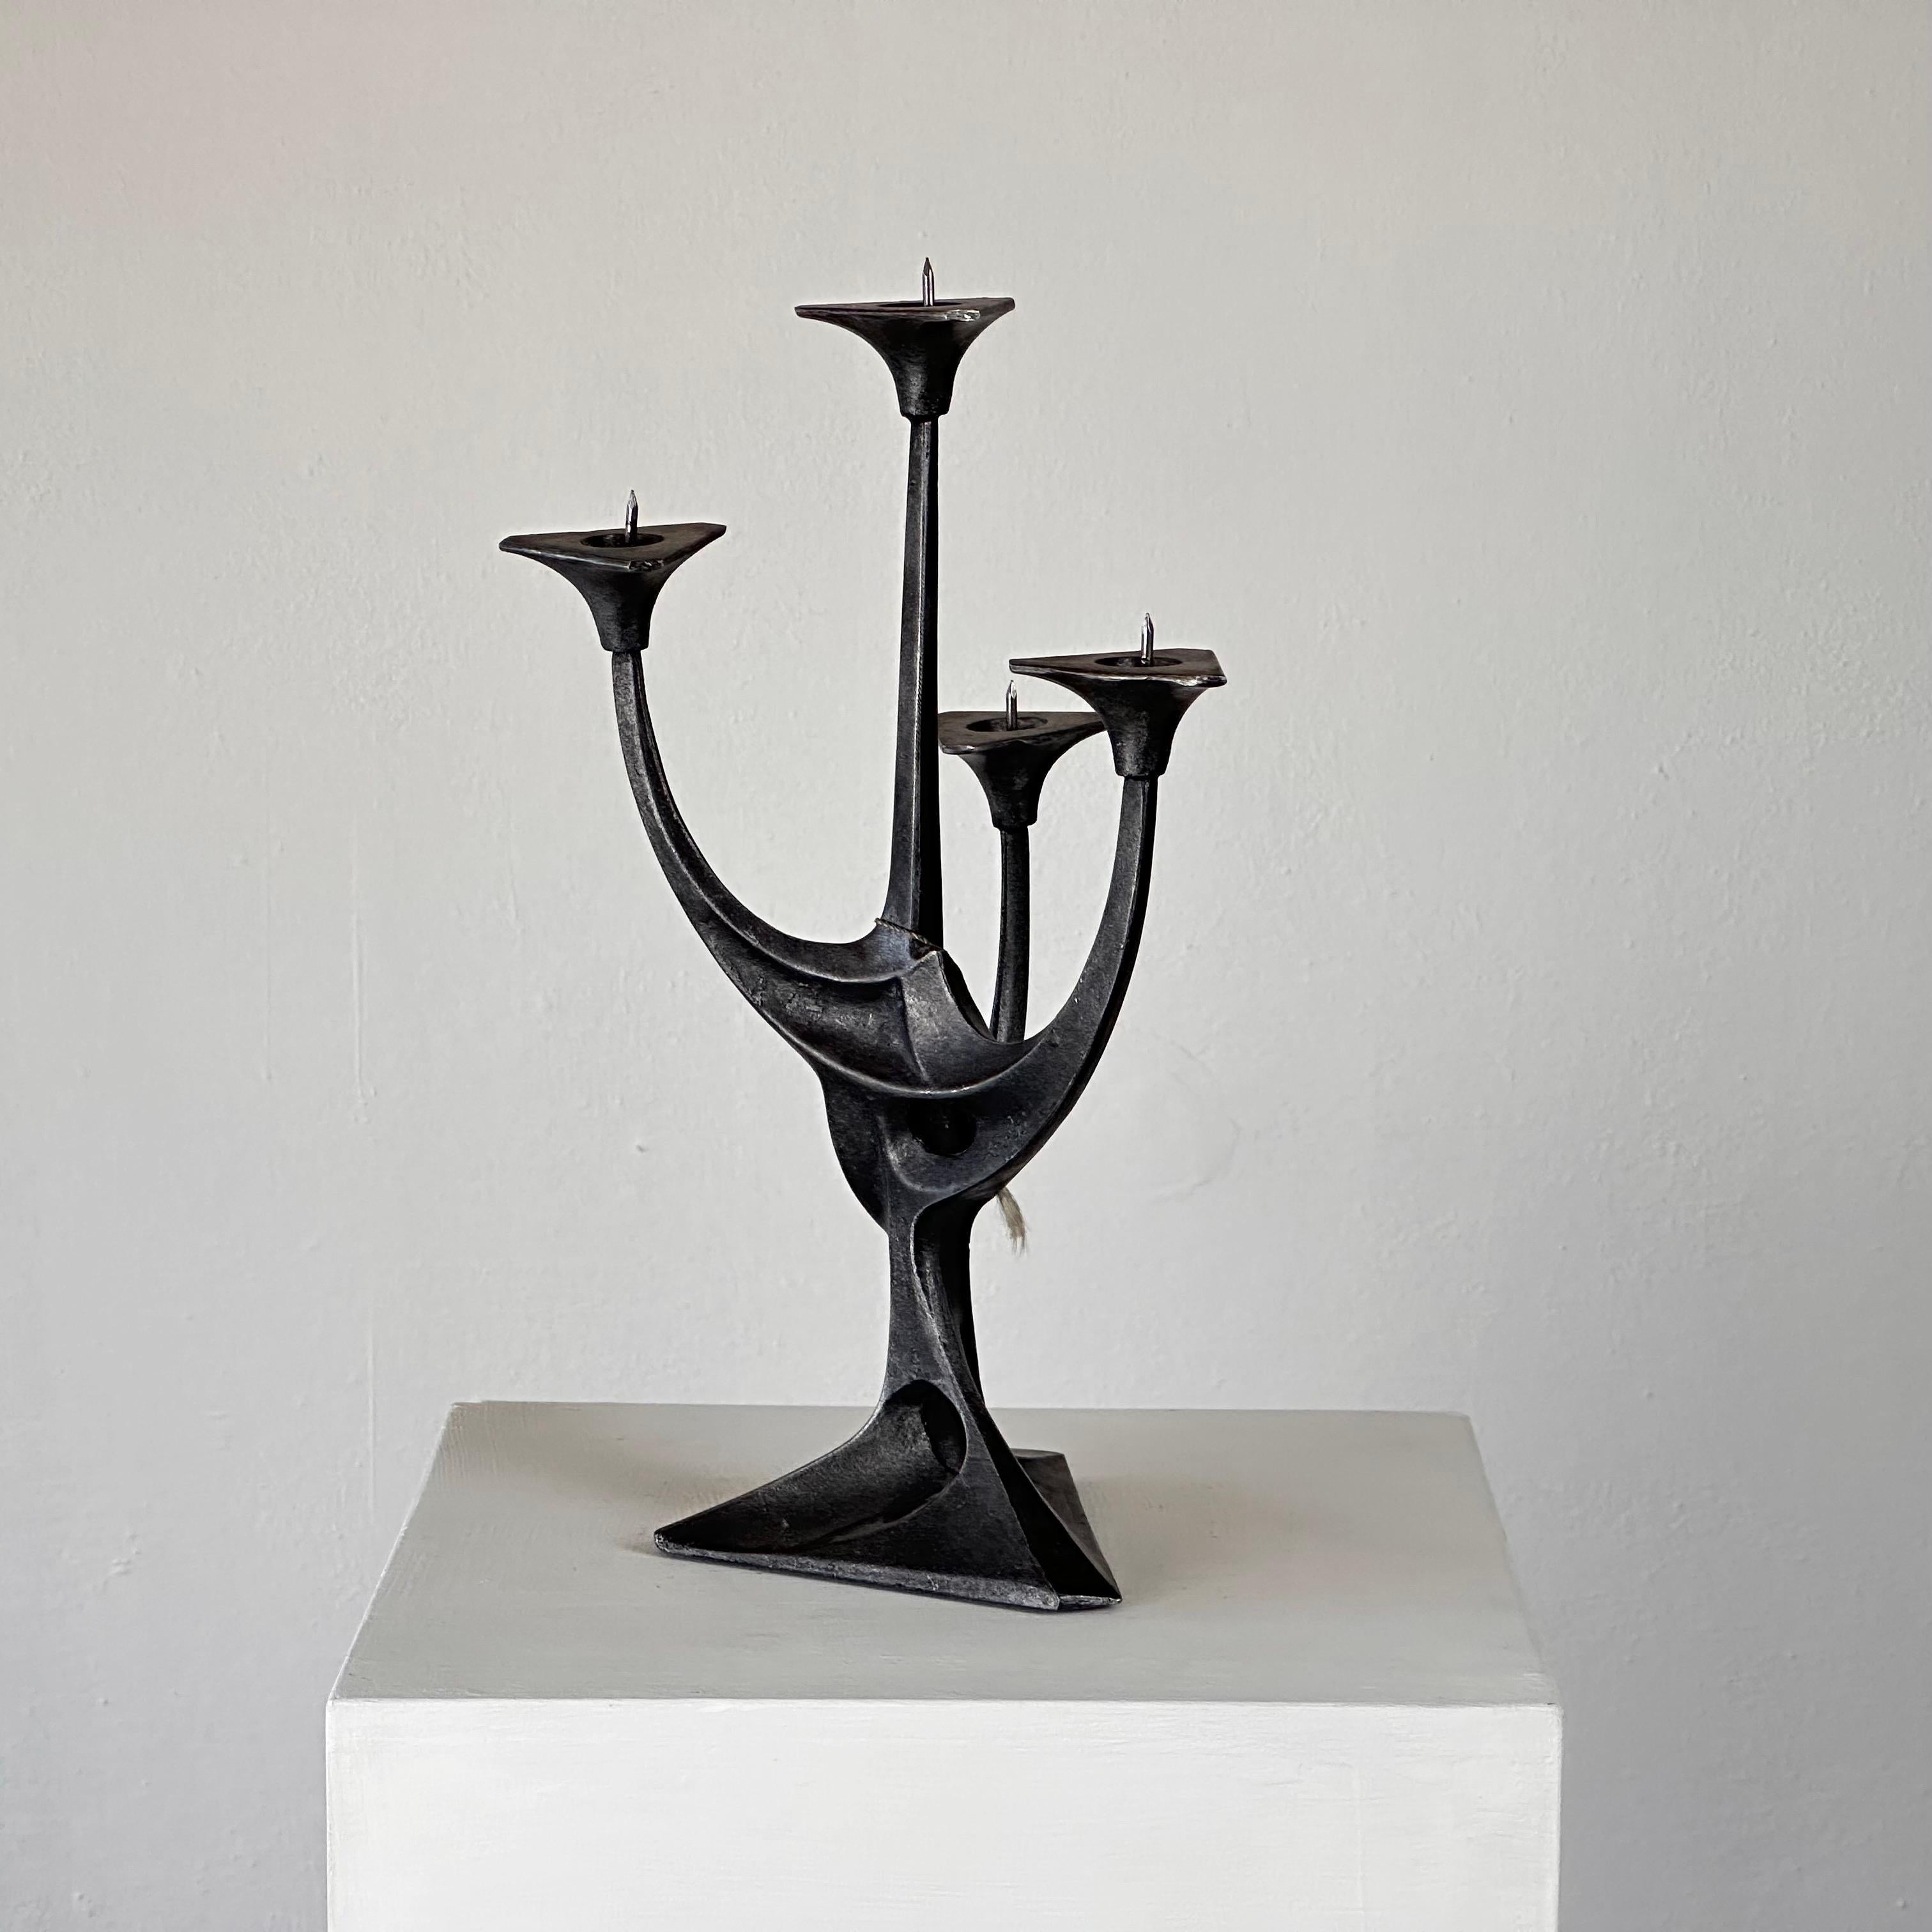 Hand-Crafted Sculptural Candelabra by Mauro Manetti for Fonderia d'Arte Firenze, 1960s For Sale